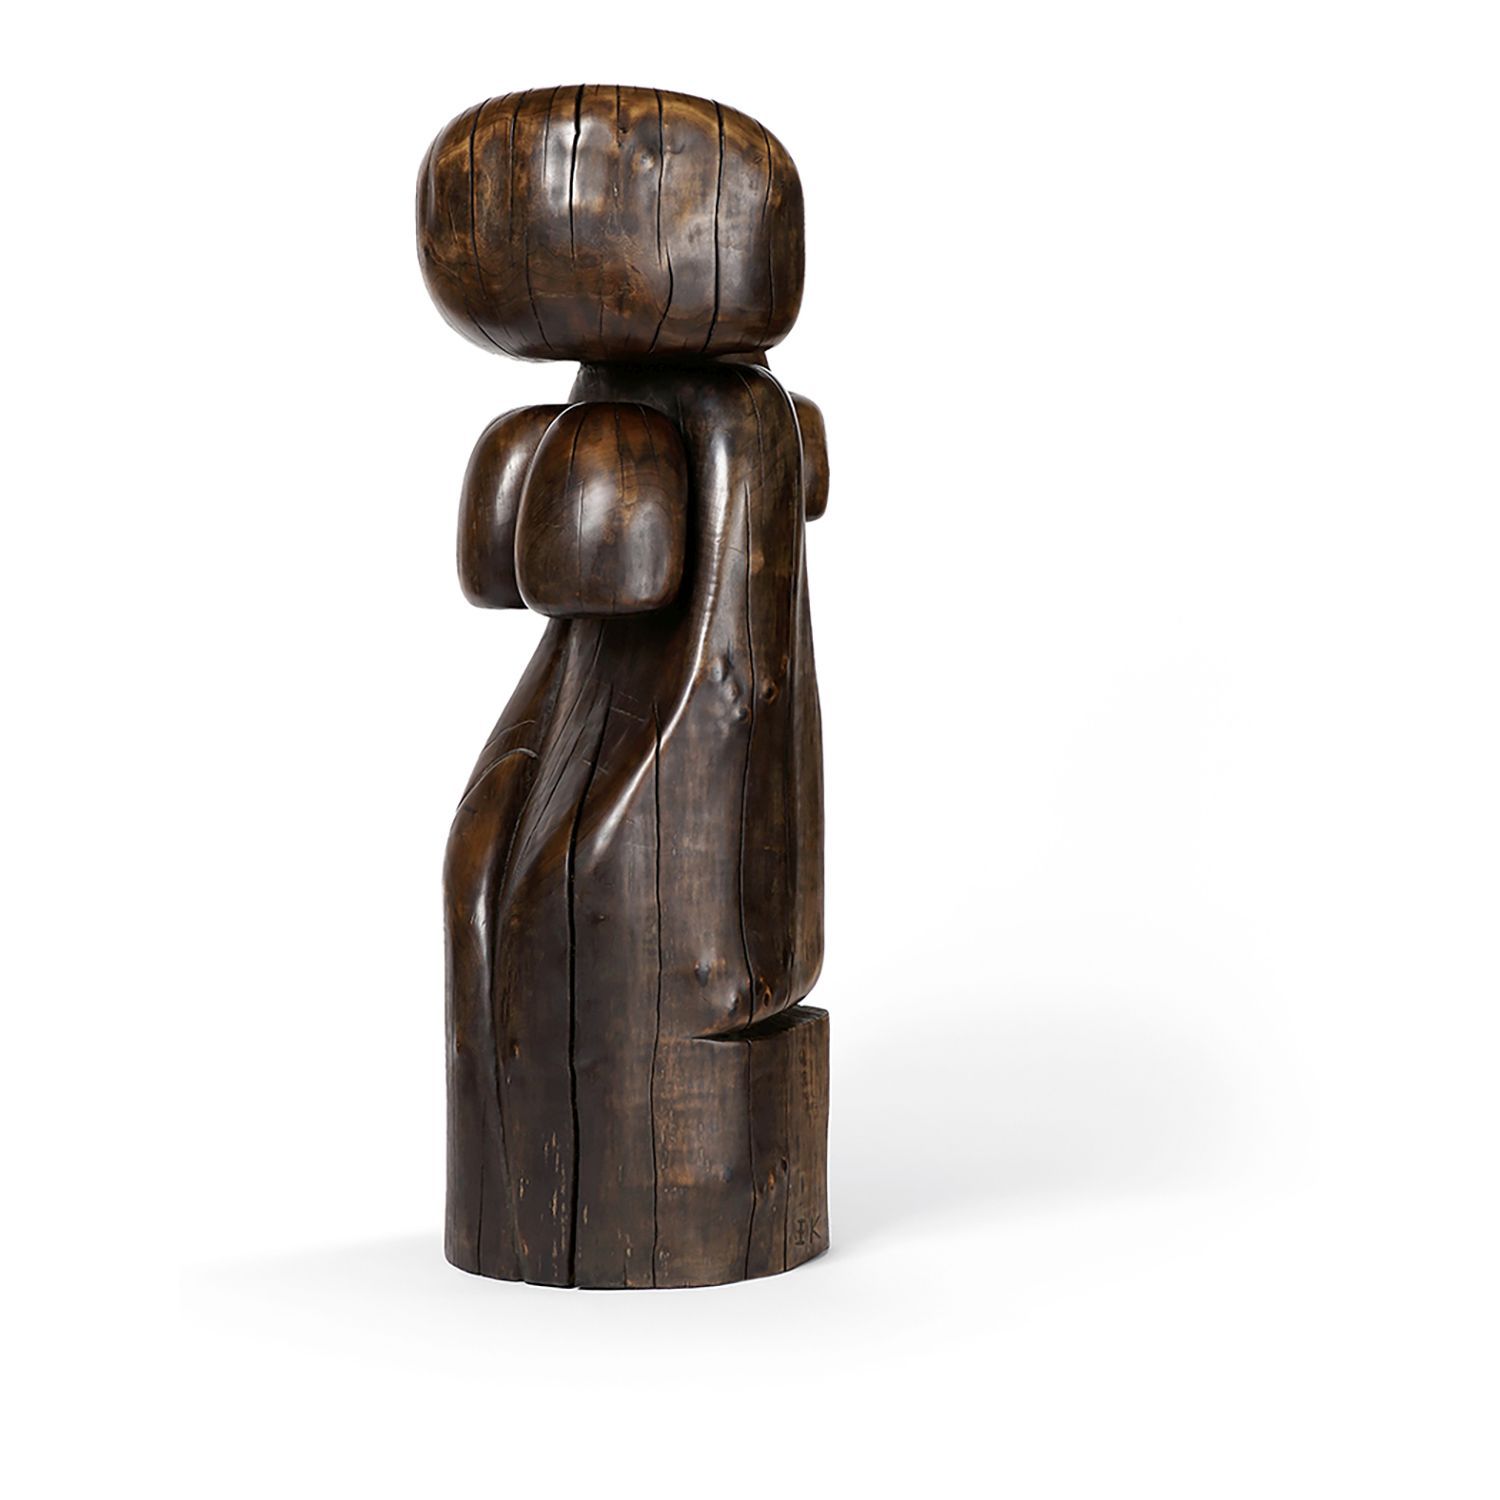 Null ƒ WANG KEPING (born 1949)
Woman, 2004
Carved maple wood
Signed with the ini&hellip;